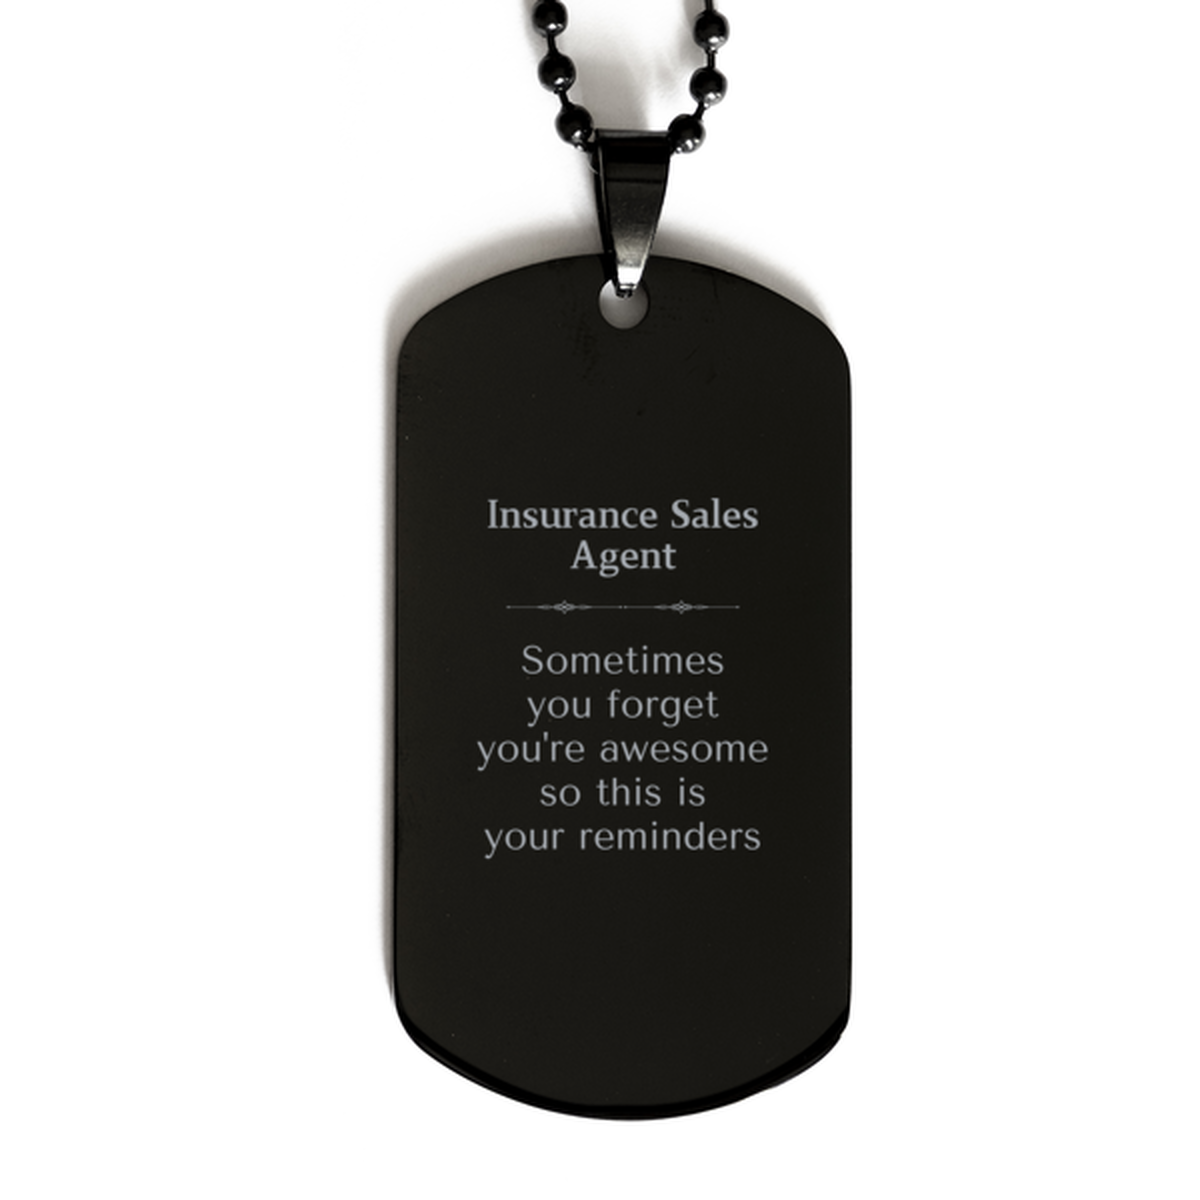 Sentimental Insurance Sales Agent Black Dog Tag, Insurance Sales Agent Sometimes you forget you're awesome so this is your reminders, Graduation Christmas Birthday Gifts for Insurance Sales Agent, Men, Women, Coworkers